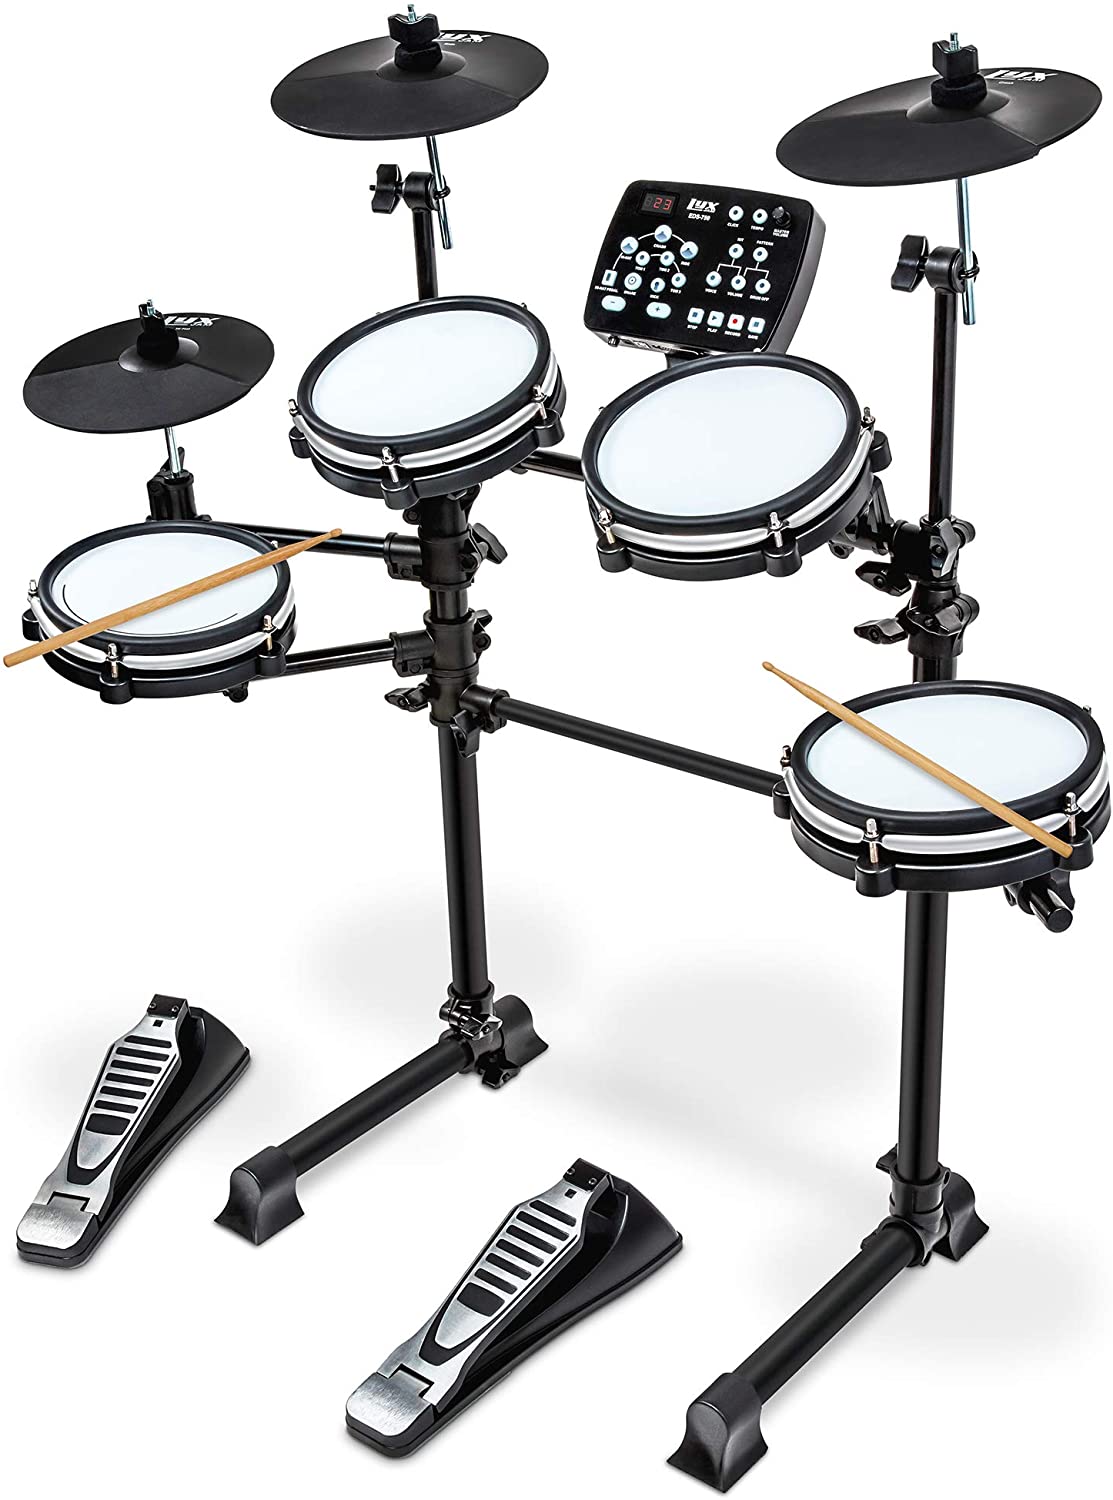 Best Electronic Drum Set under 500: Best Budget-Friendly Options for Beginners